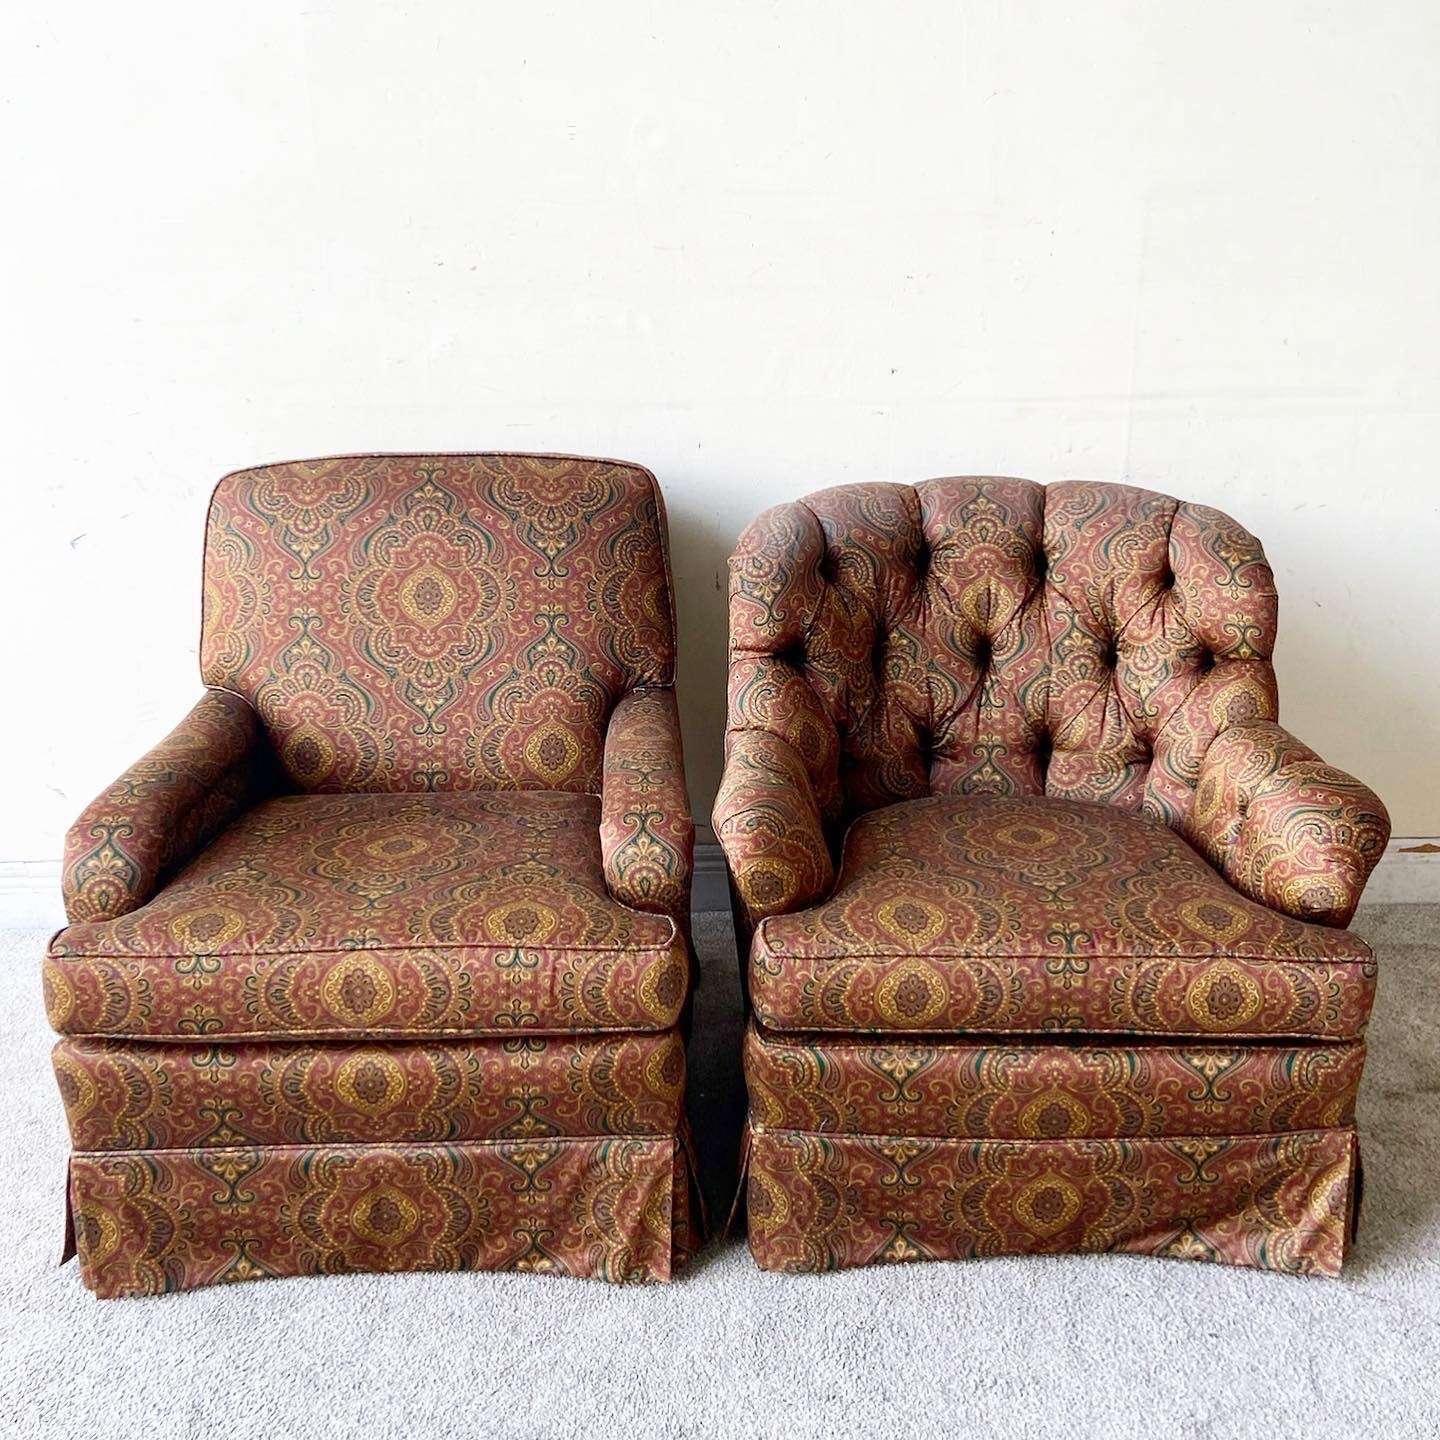 Amazing vintage mid century modern pair of his and hers lounge chairs. Each feature a wonderful multicolored fabric. One of the chairs displays a tufted back rest.

Other chair measures 29”W, 35”D, 33”H

Seat height is 17.5 in